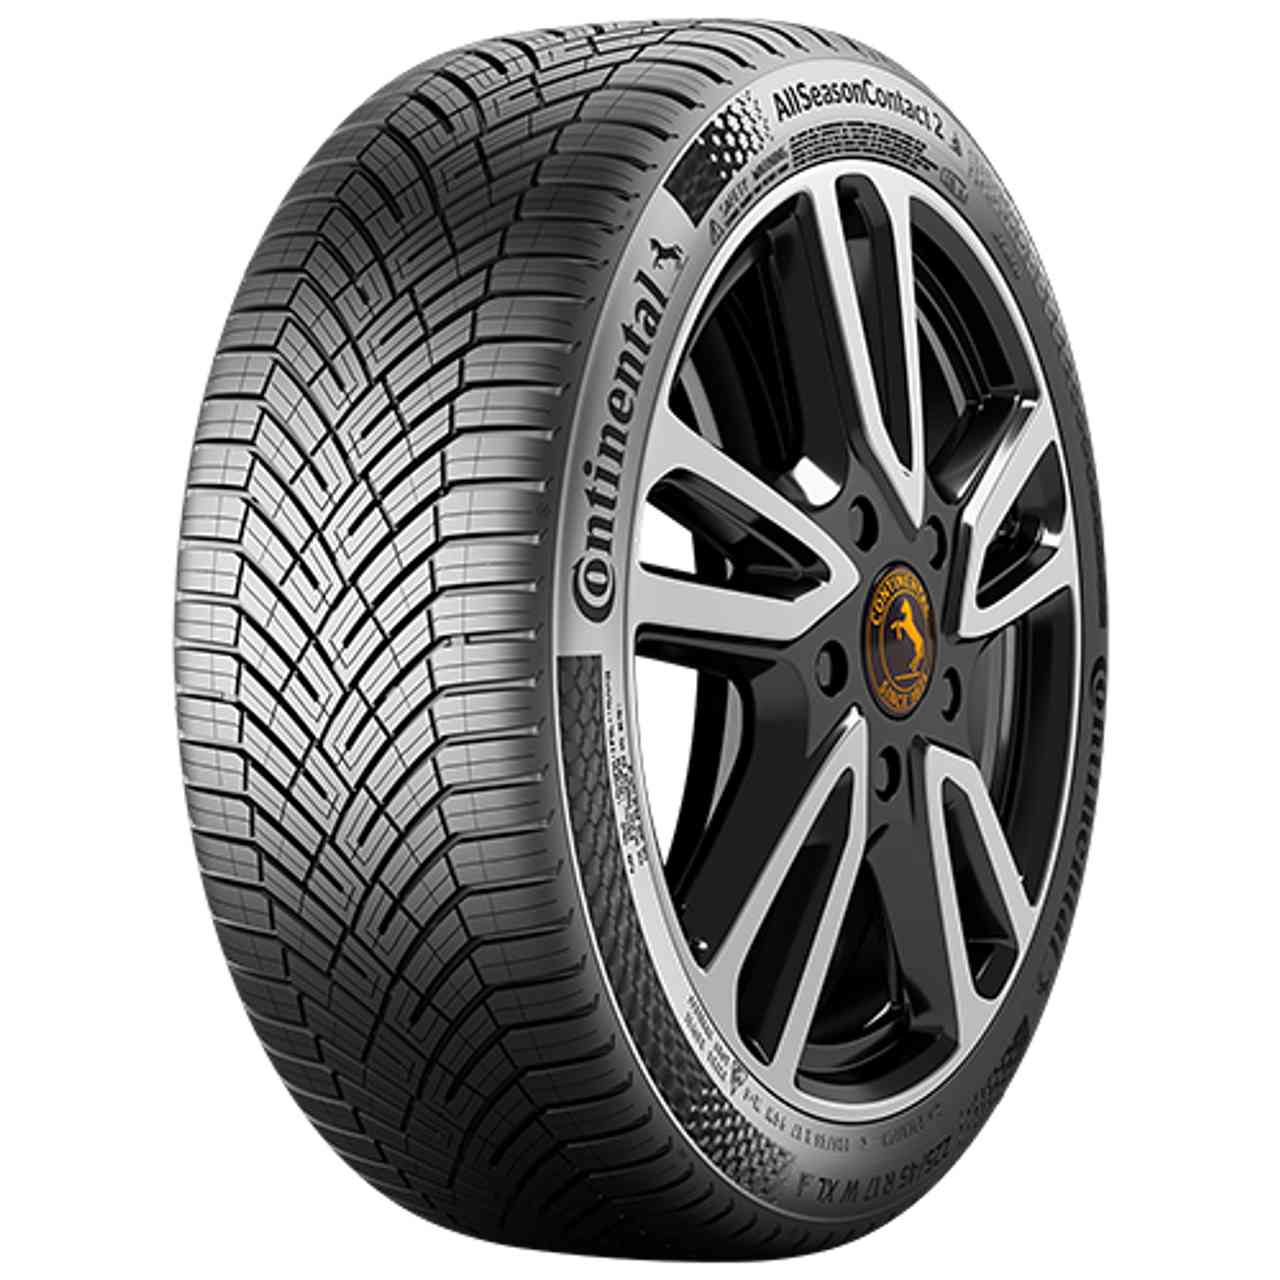 CONTINENTAL ALLSEASONCONTACT 2 (EVc) 215/60R17 96H BSW